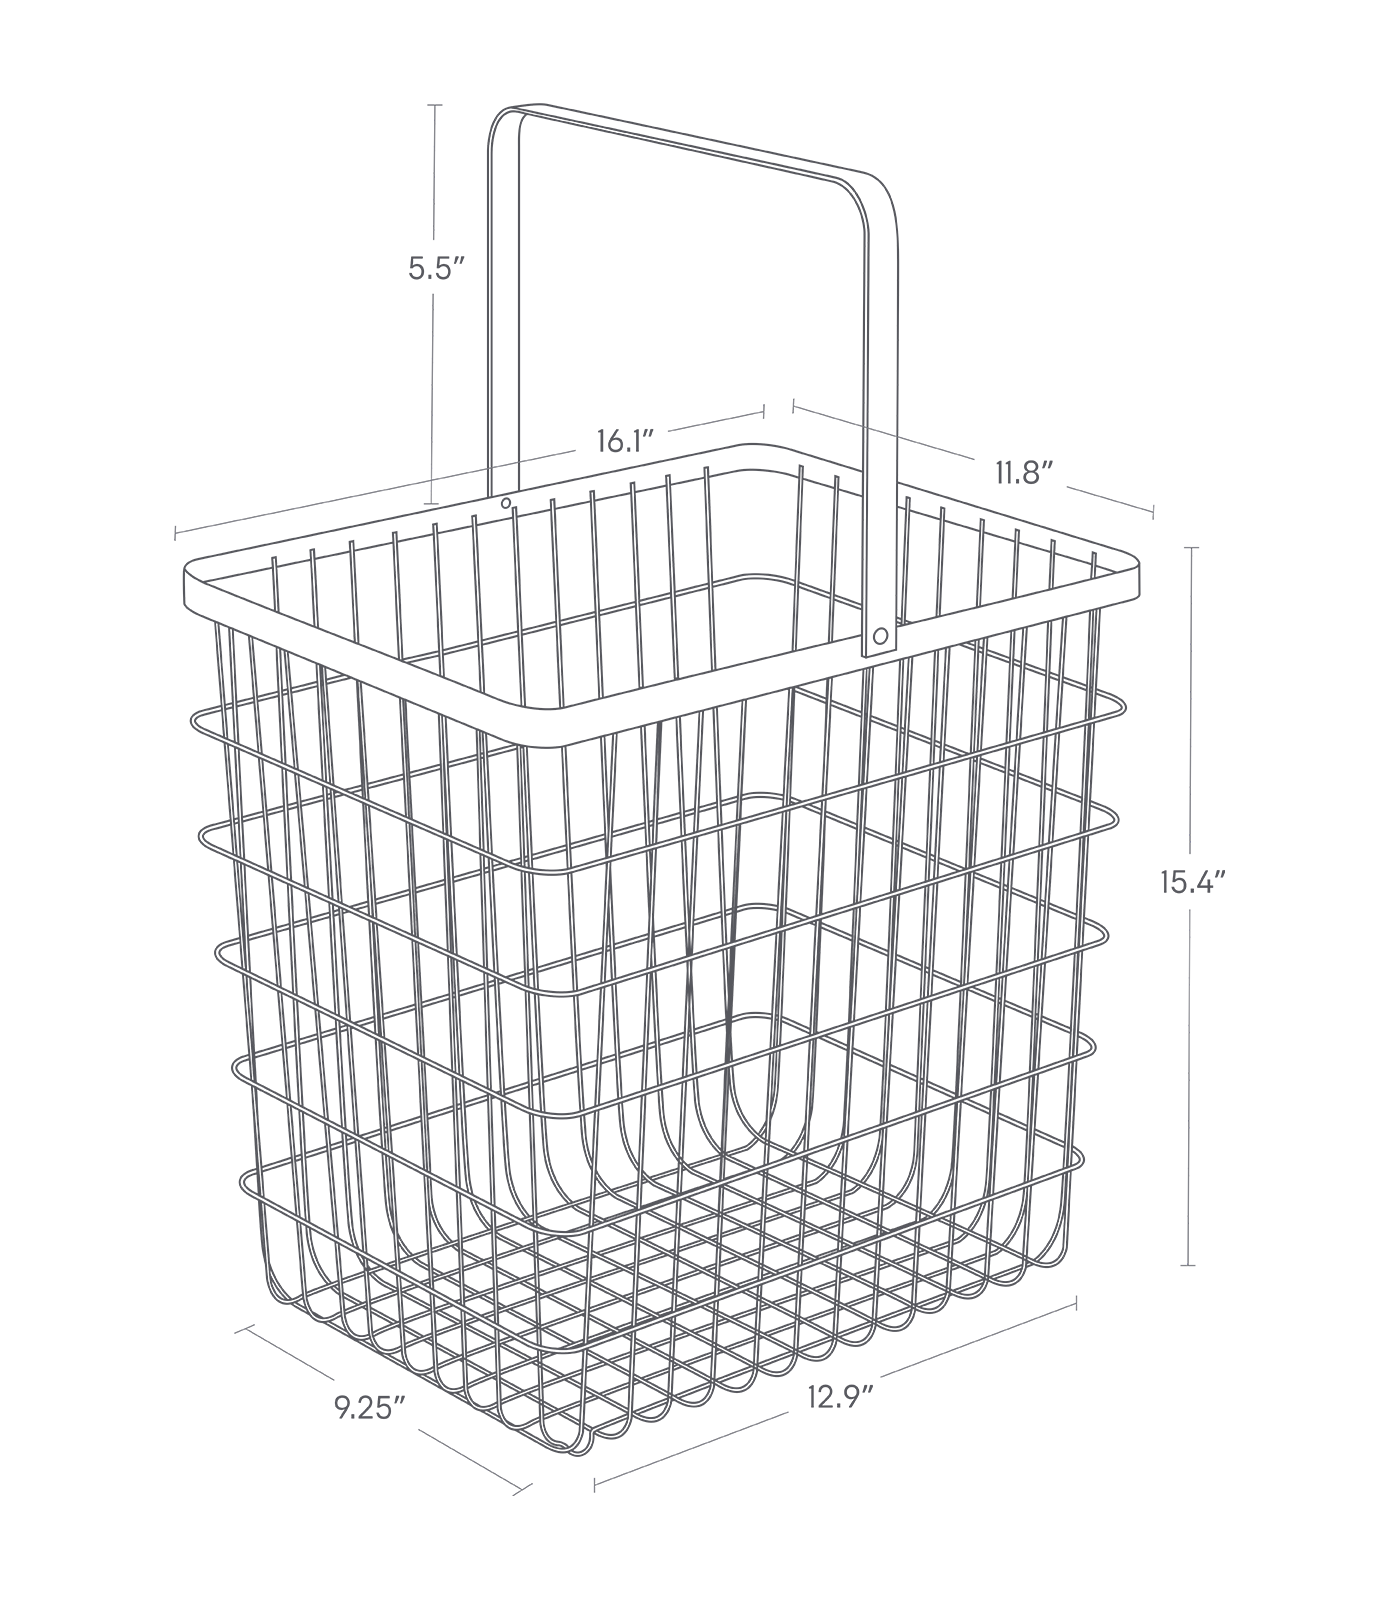 Dimension image for Wire Basket showing a total bottom length of 12.9